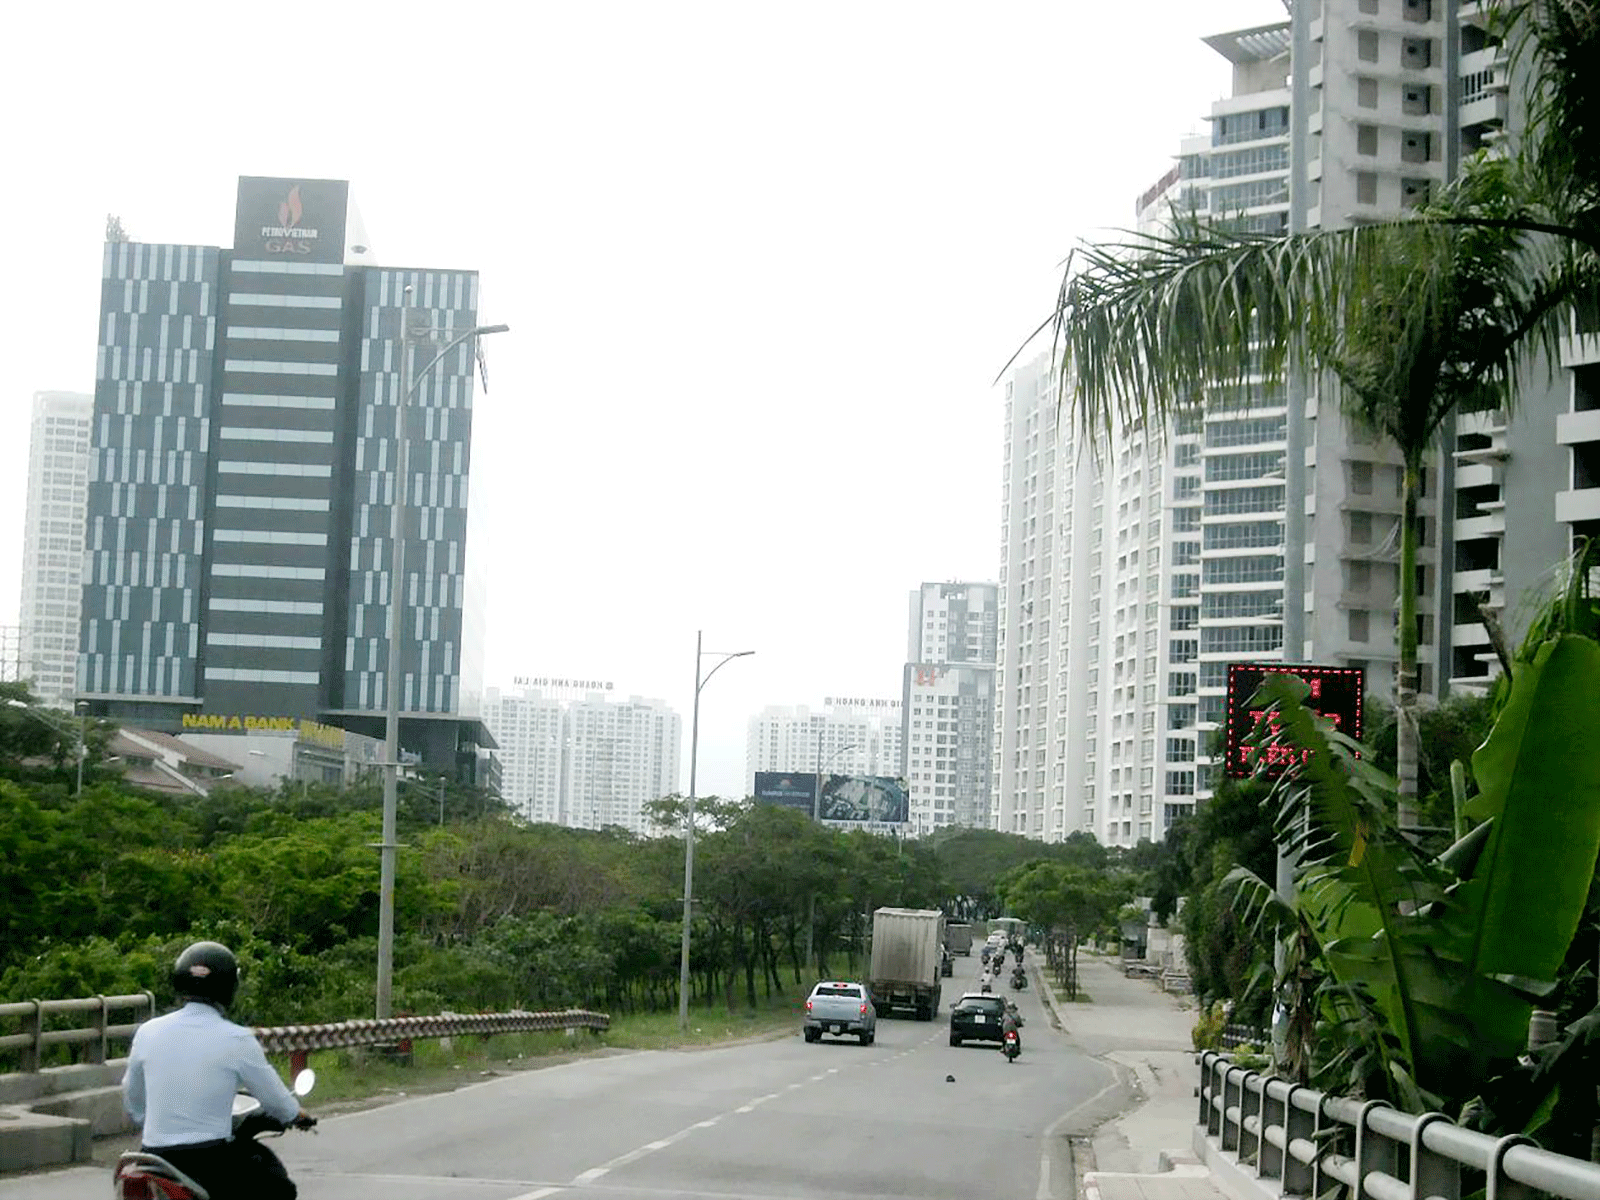 Many buildings have been built in Nguyen Huu Tho street, Nha Be district, HCMC (Photo: SGGP)